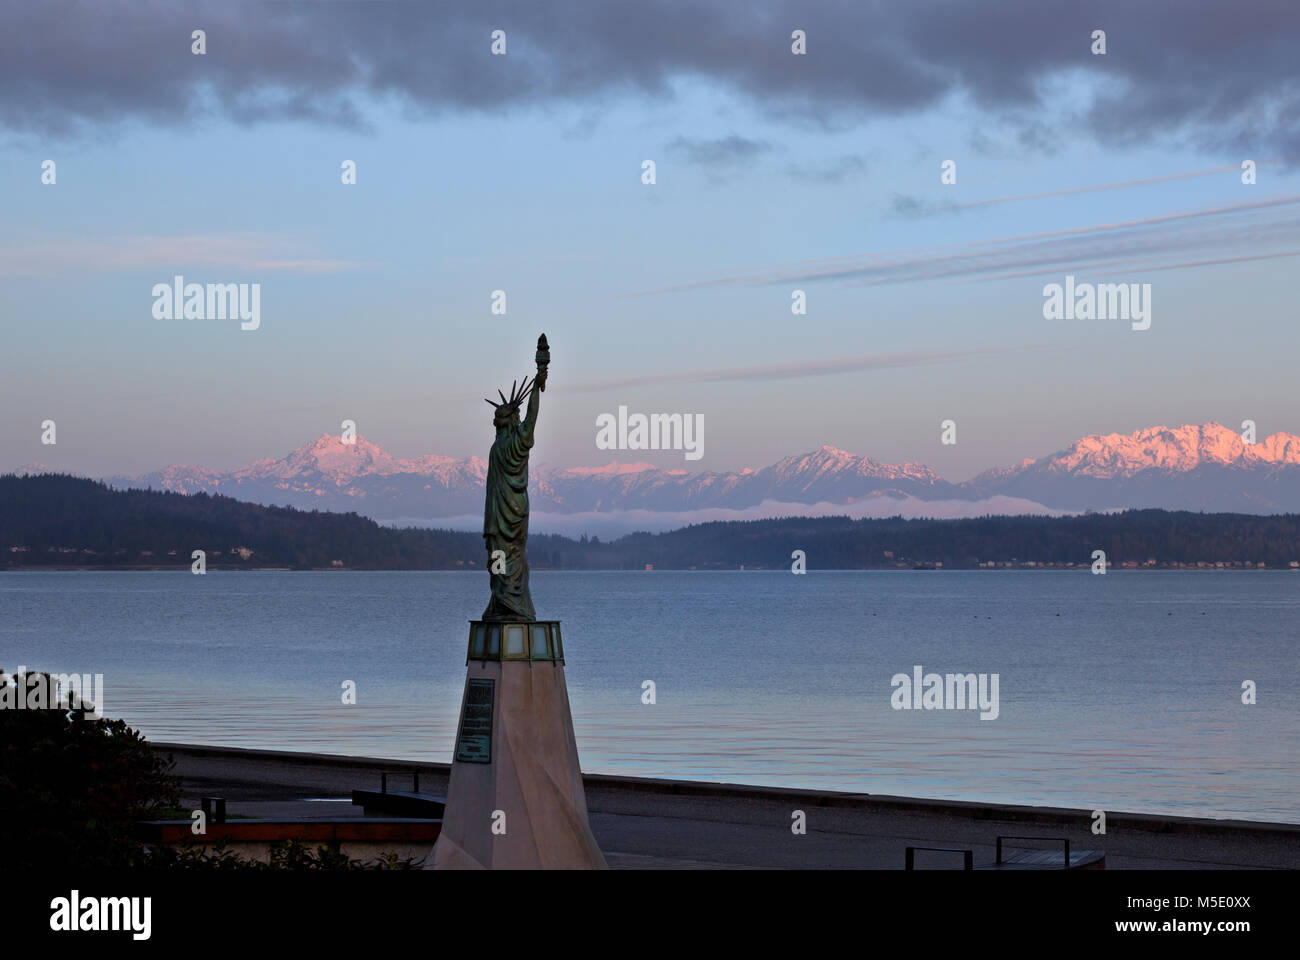 WA13614-00...WASHINGTON - Replica of the Statue of Liberty located on Alki Beach in West Seattle with view of the Olympic Mountains. Stock Photo